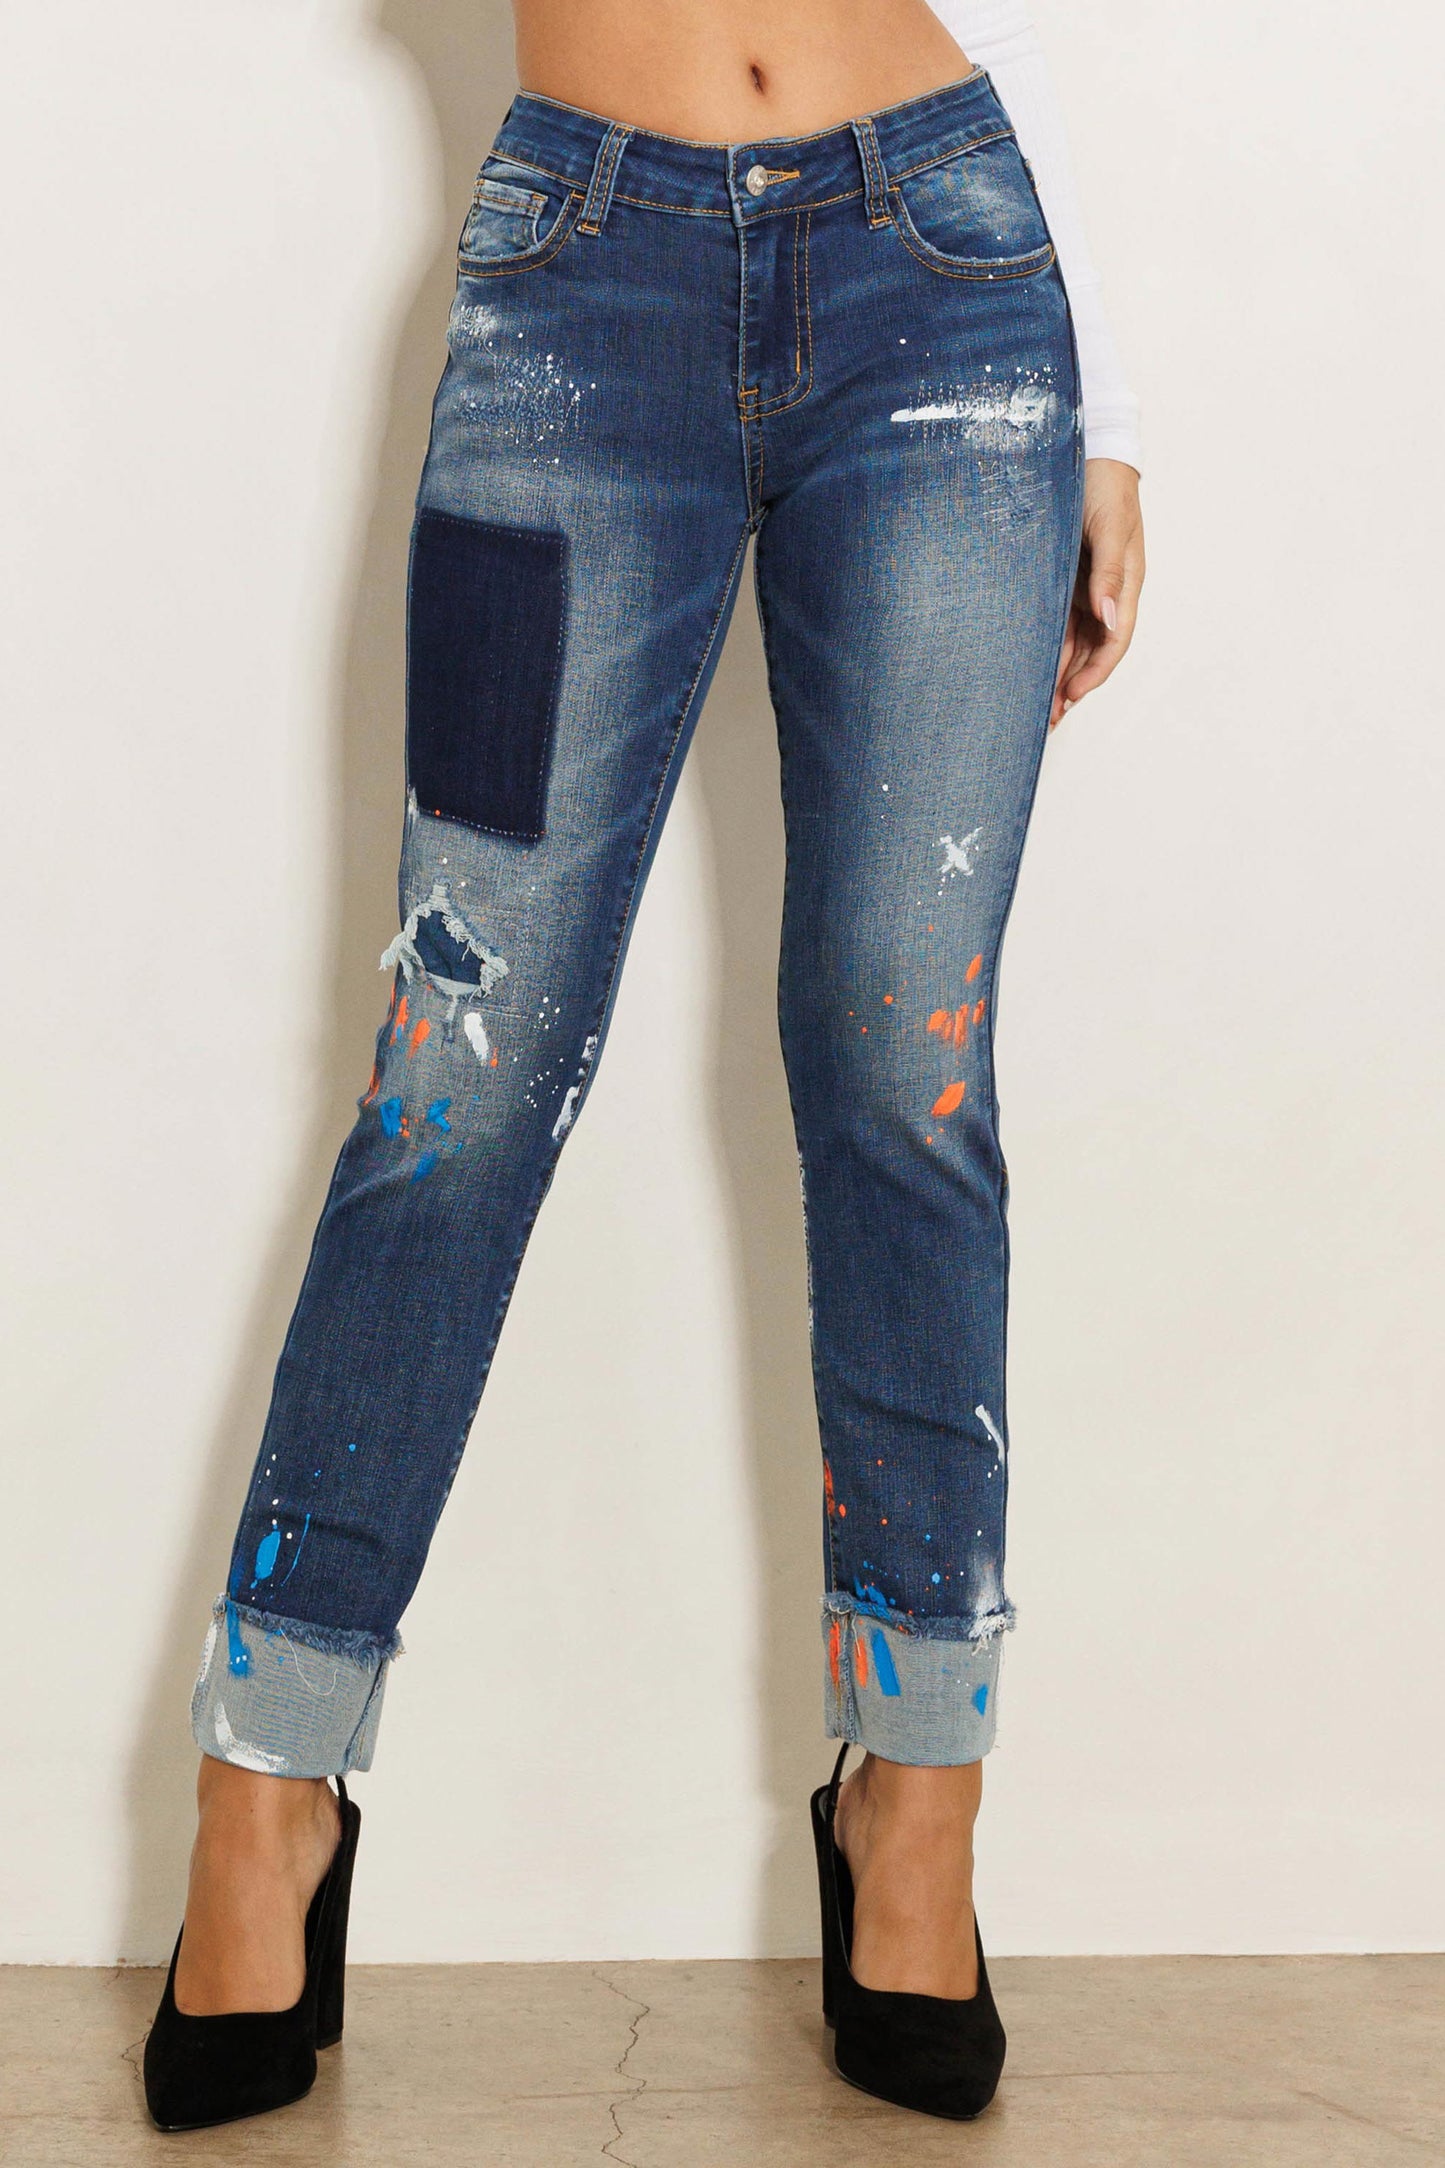 ABSTRACT ARTWORK JEANS